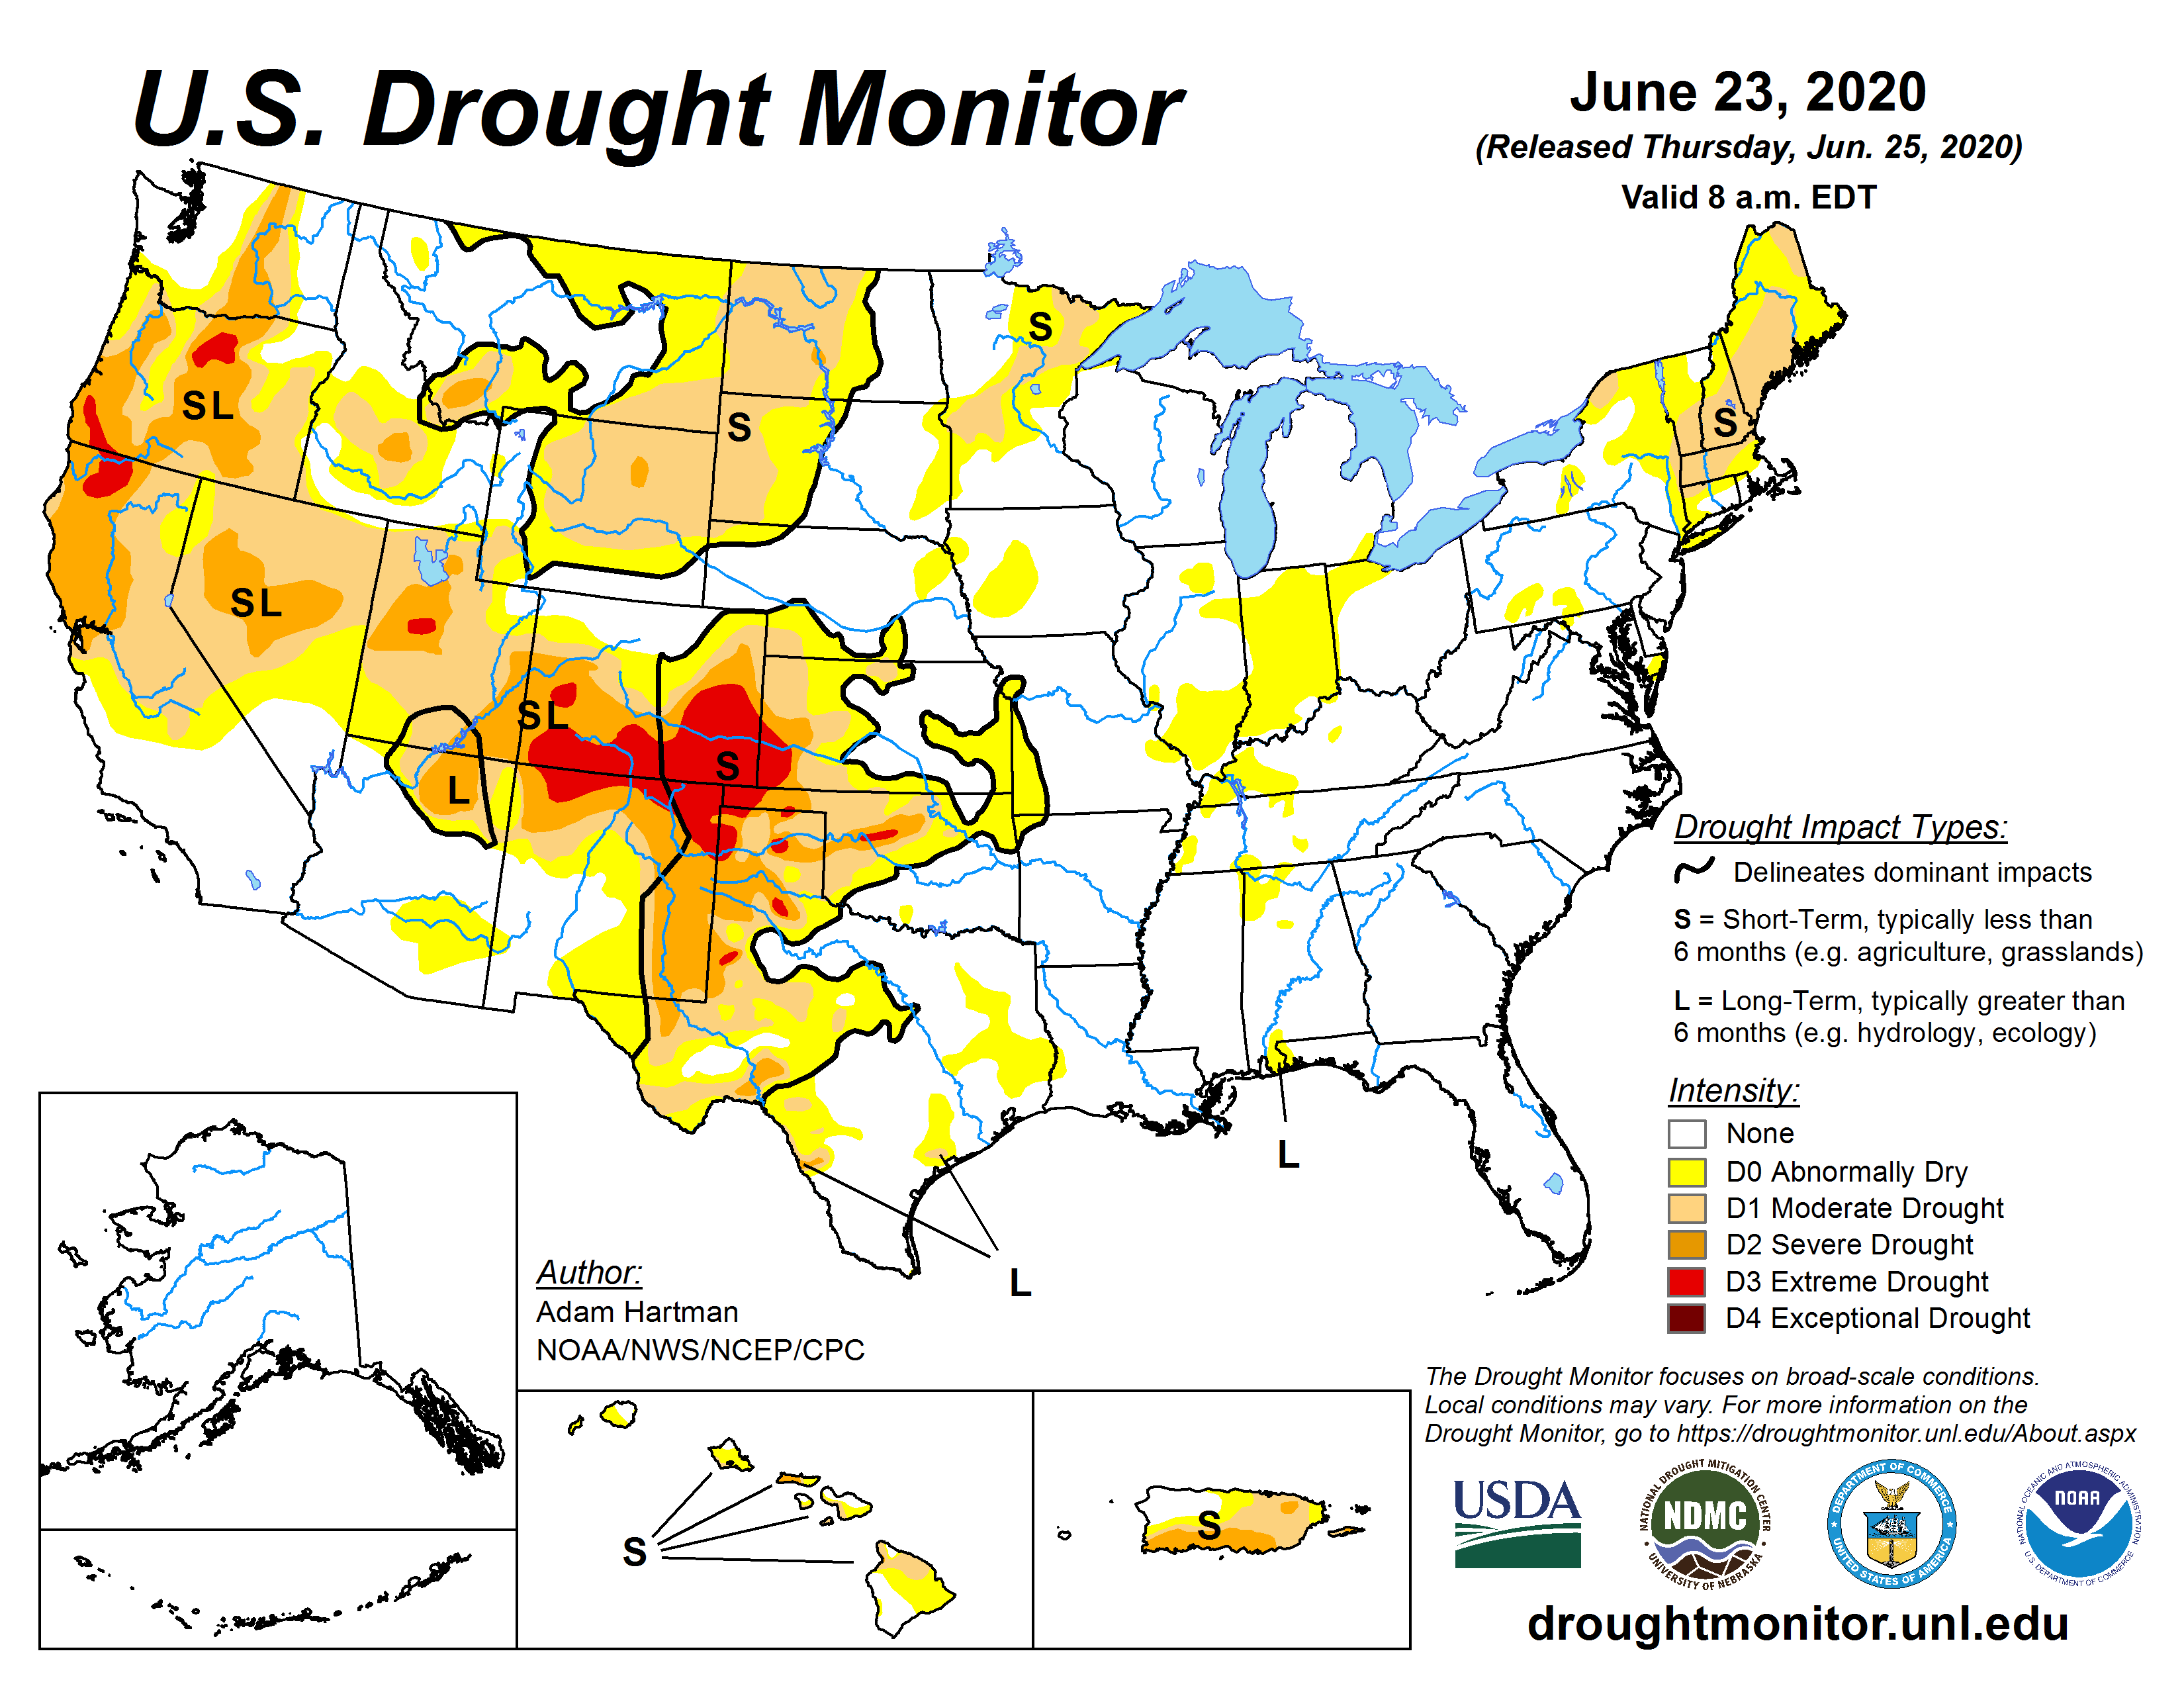 Drought monitor